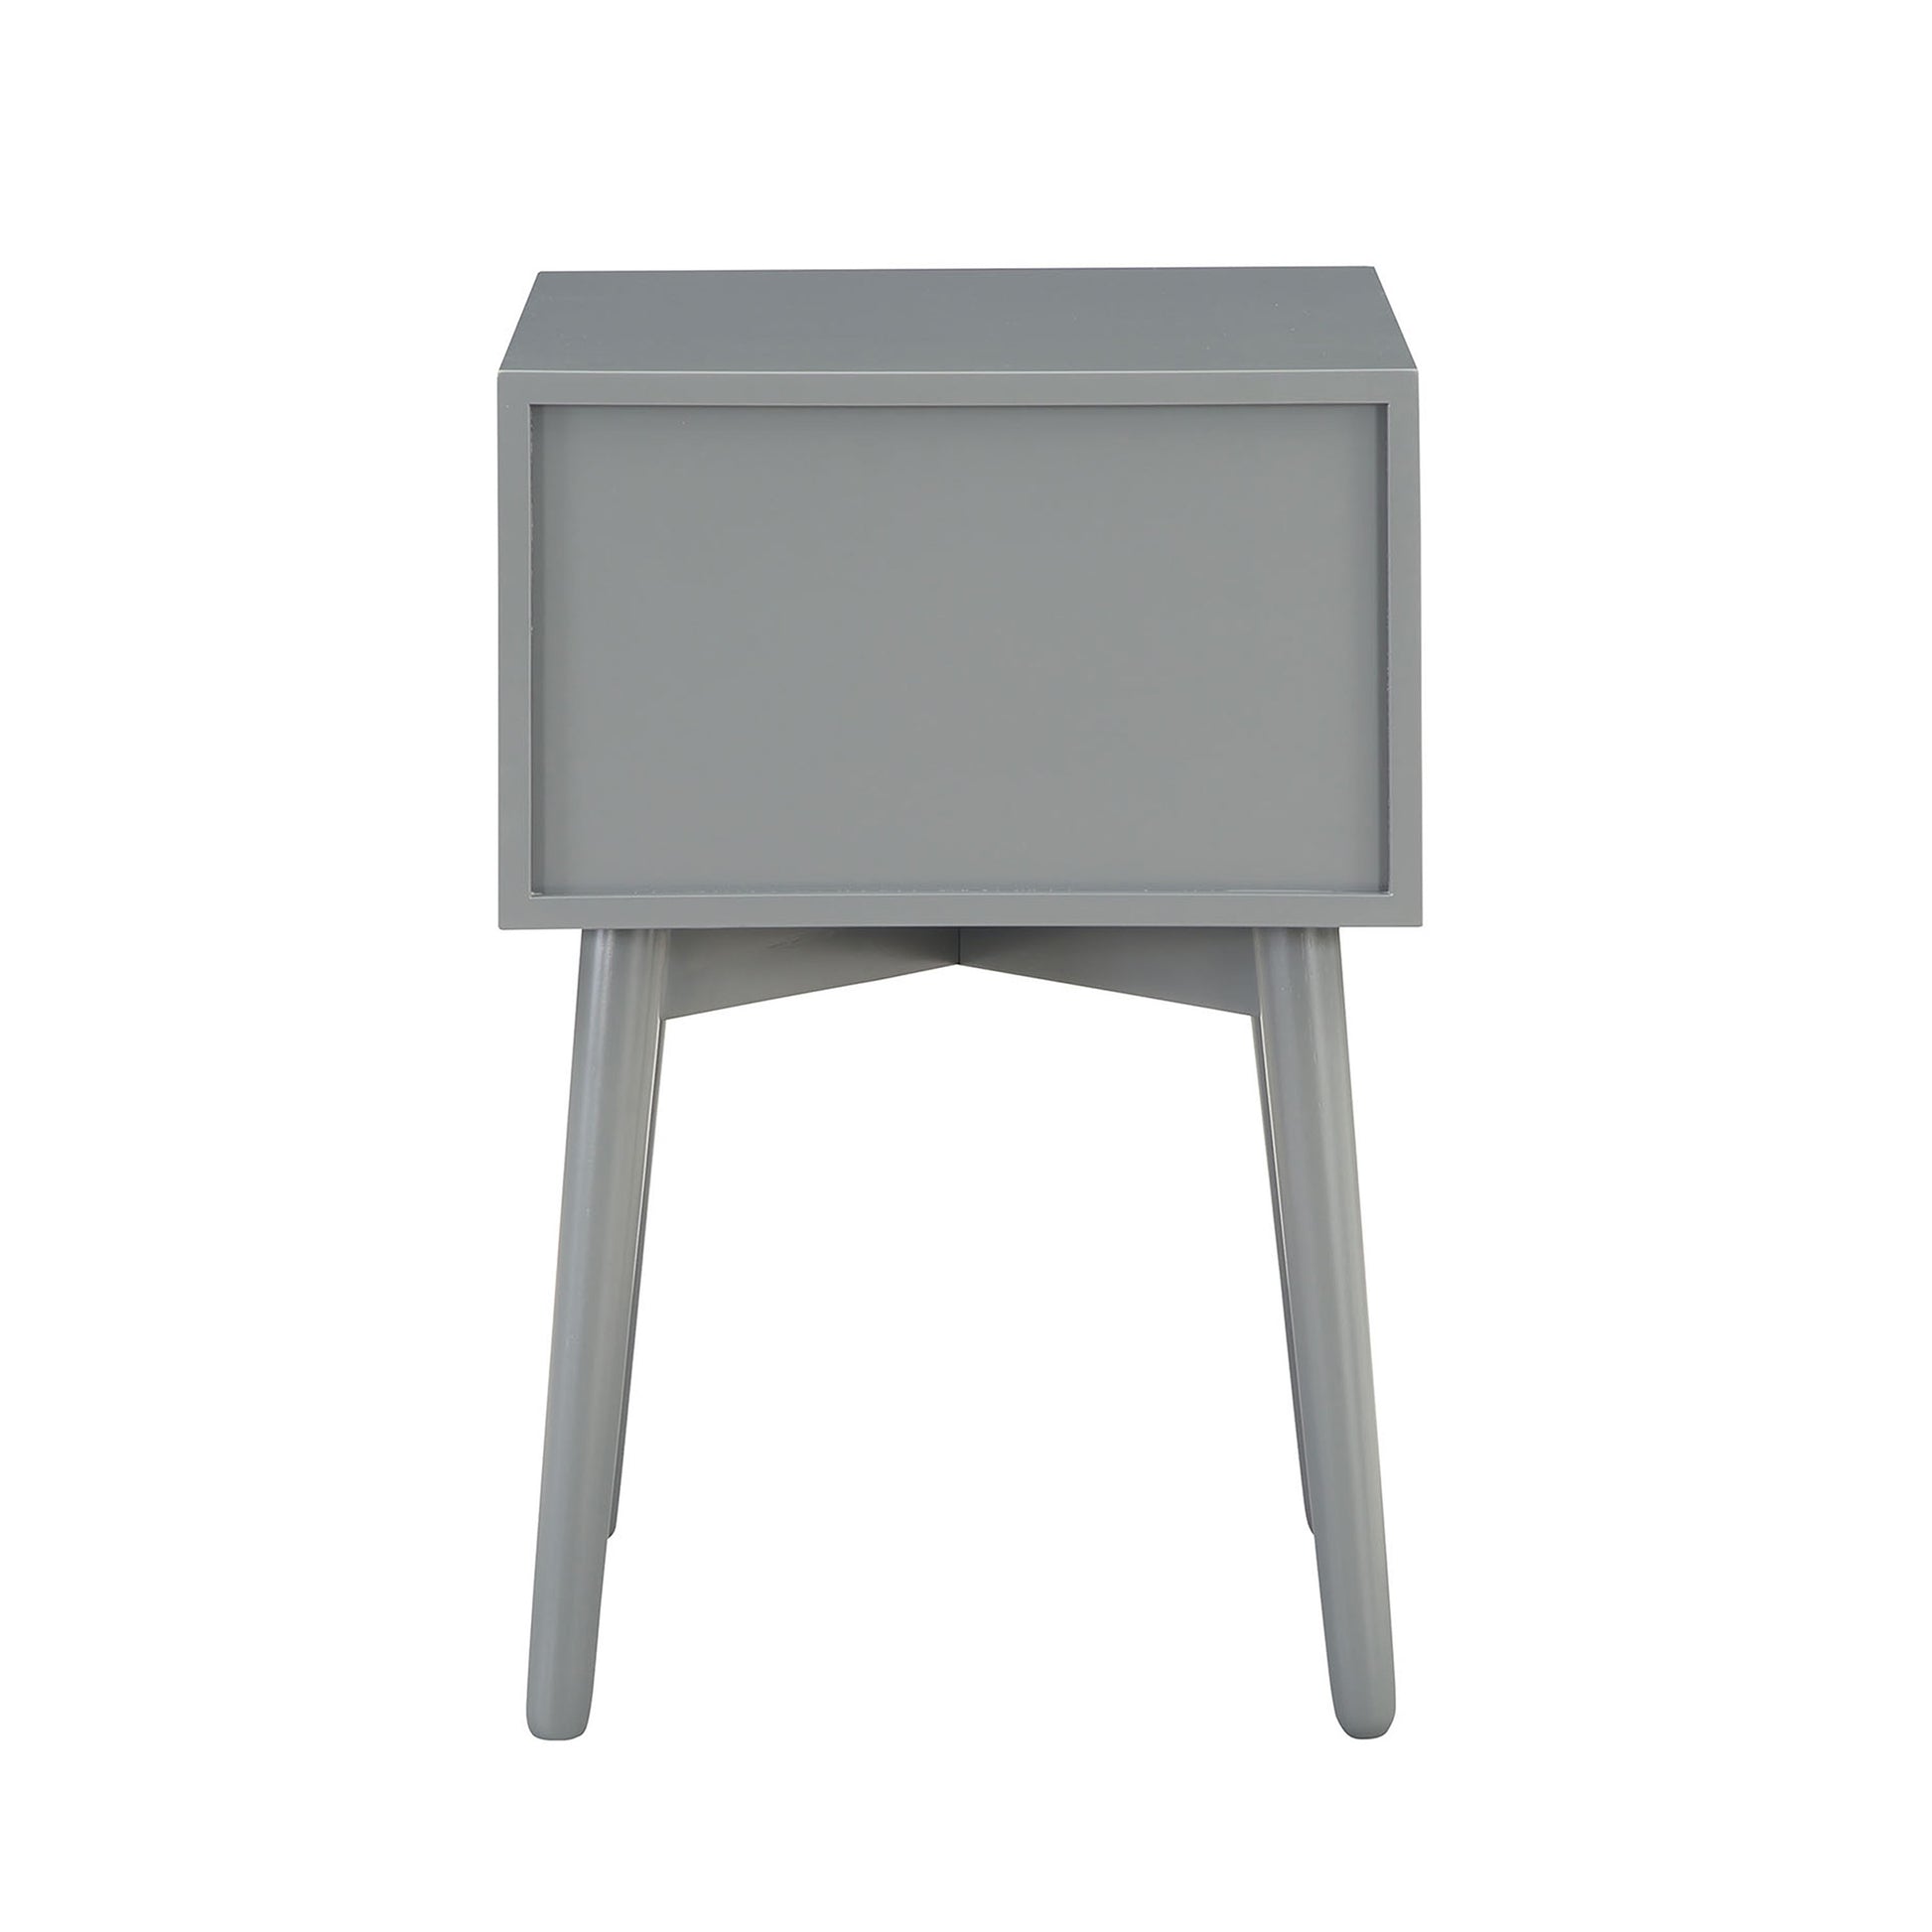 Front-facing back view of a modern gray two-drawer compact nightstand with splayed legs on a white background